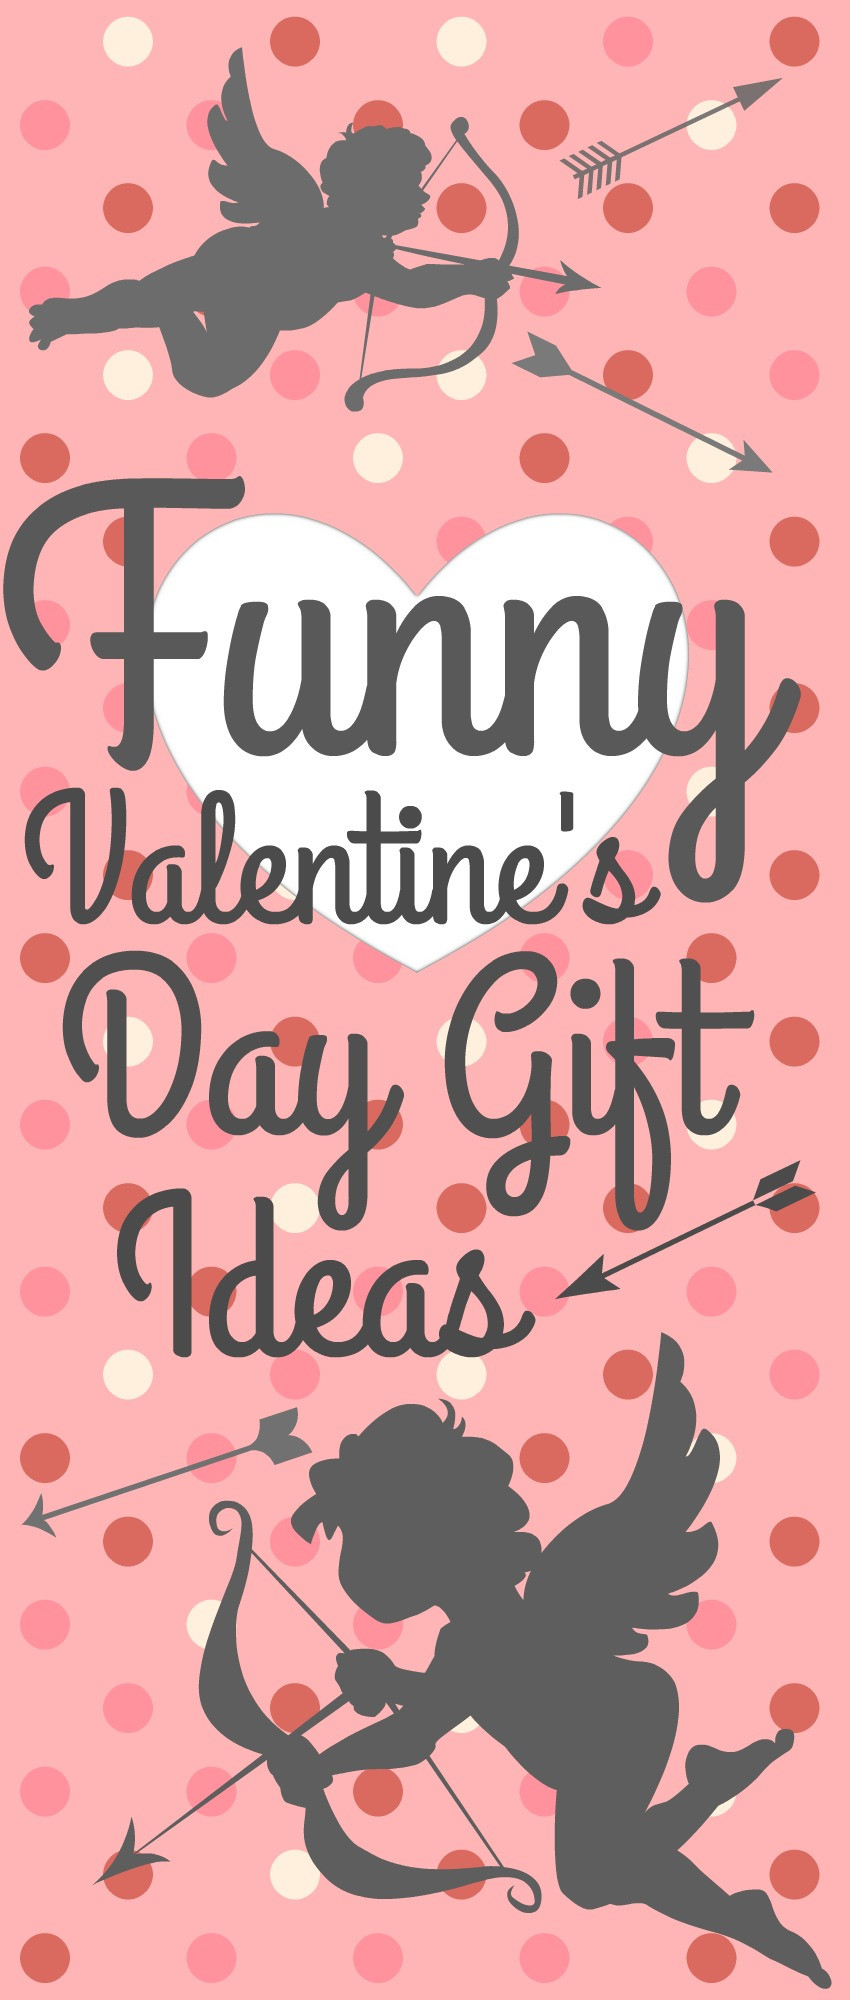 Funny Valentine Gift Ideas
 Funny Valentine s Day Gifts